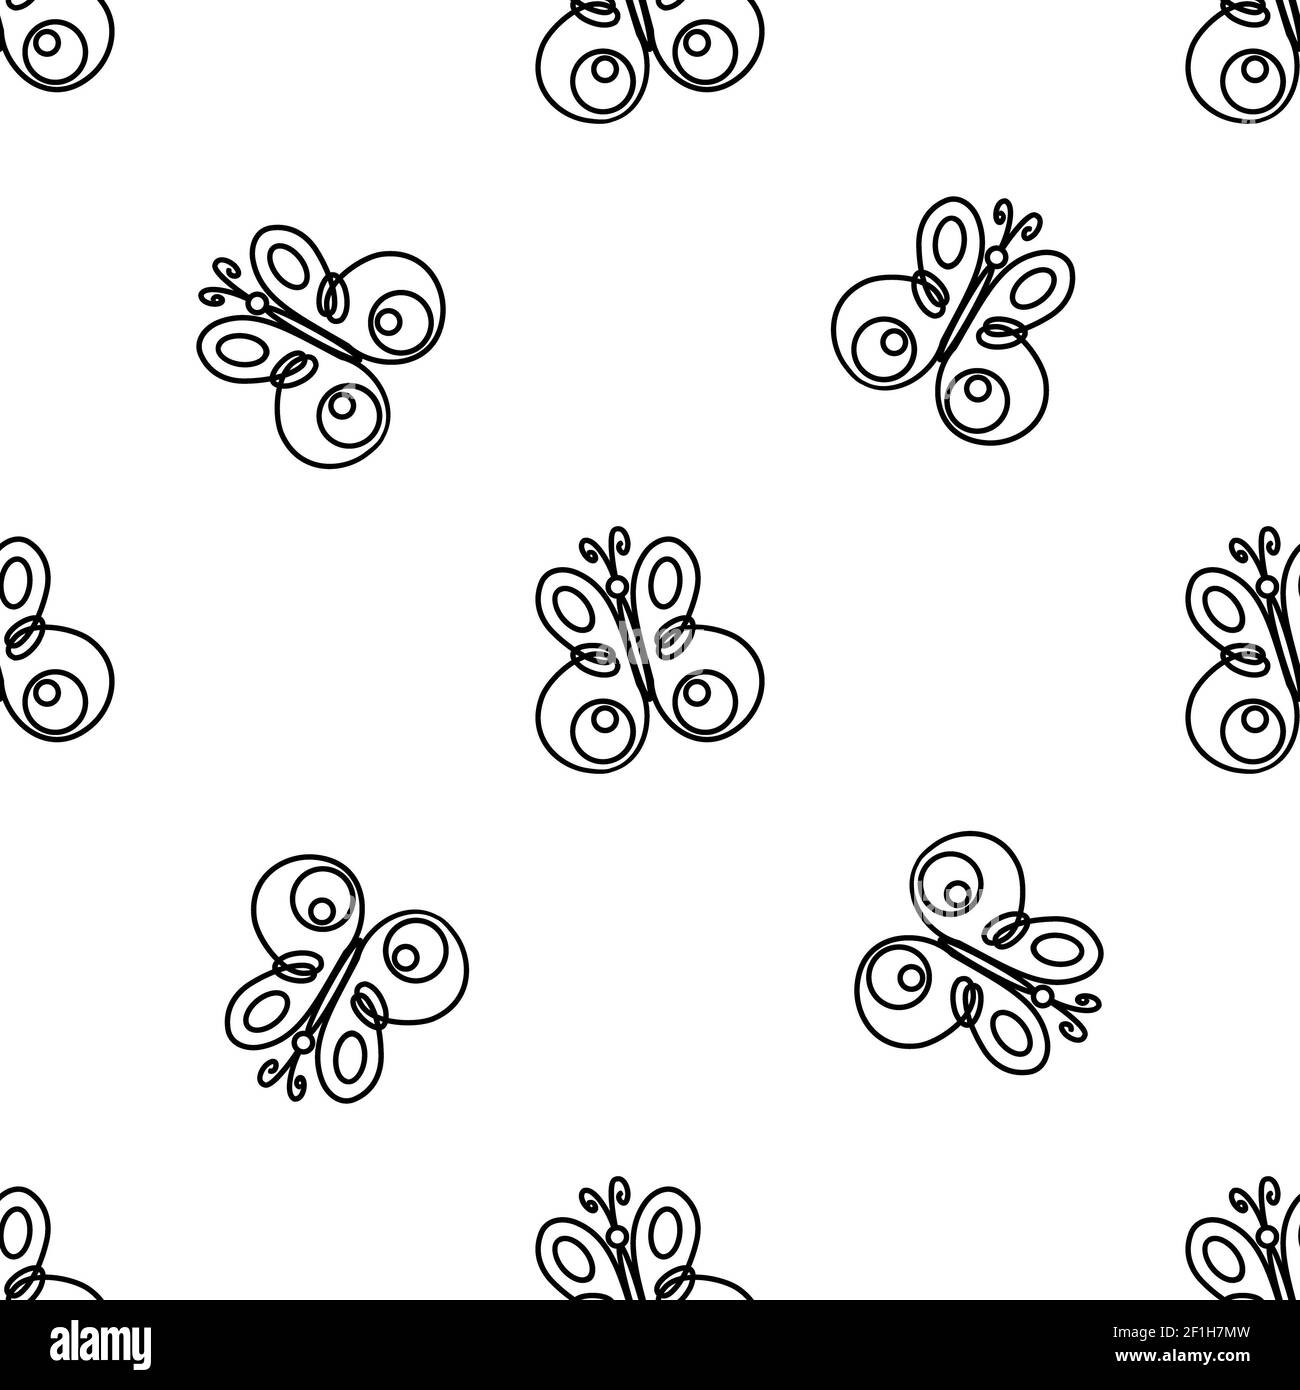 Seamless background of black and white butterflies. Stock Photo